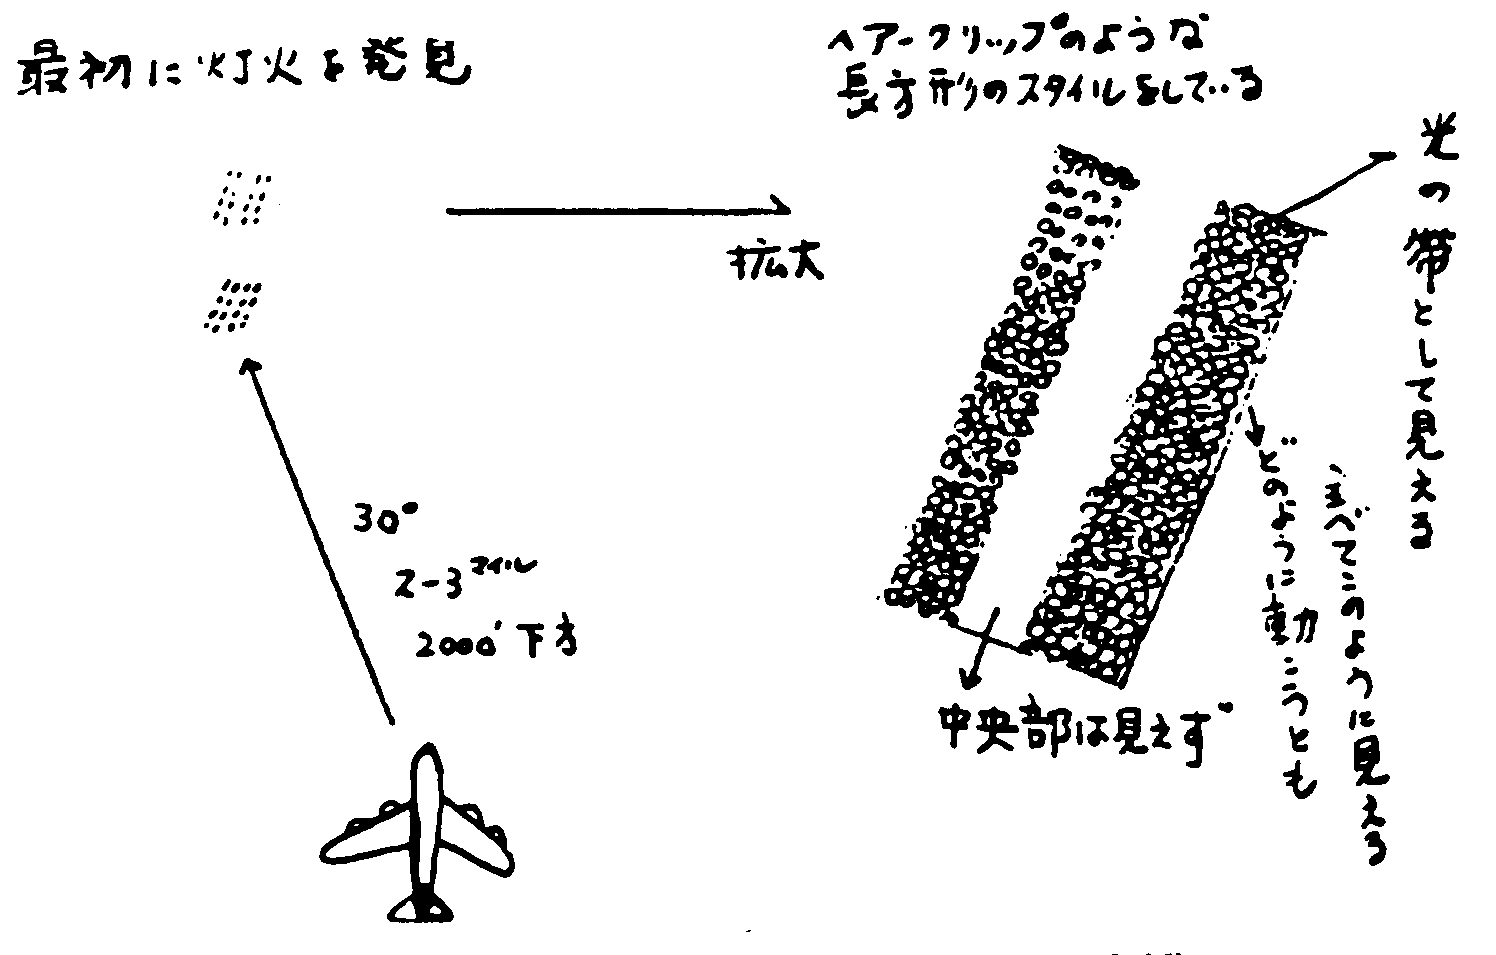 Figure 10 : Initial view of "two spaceships" to the left front of airliner